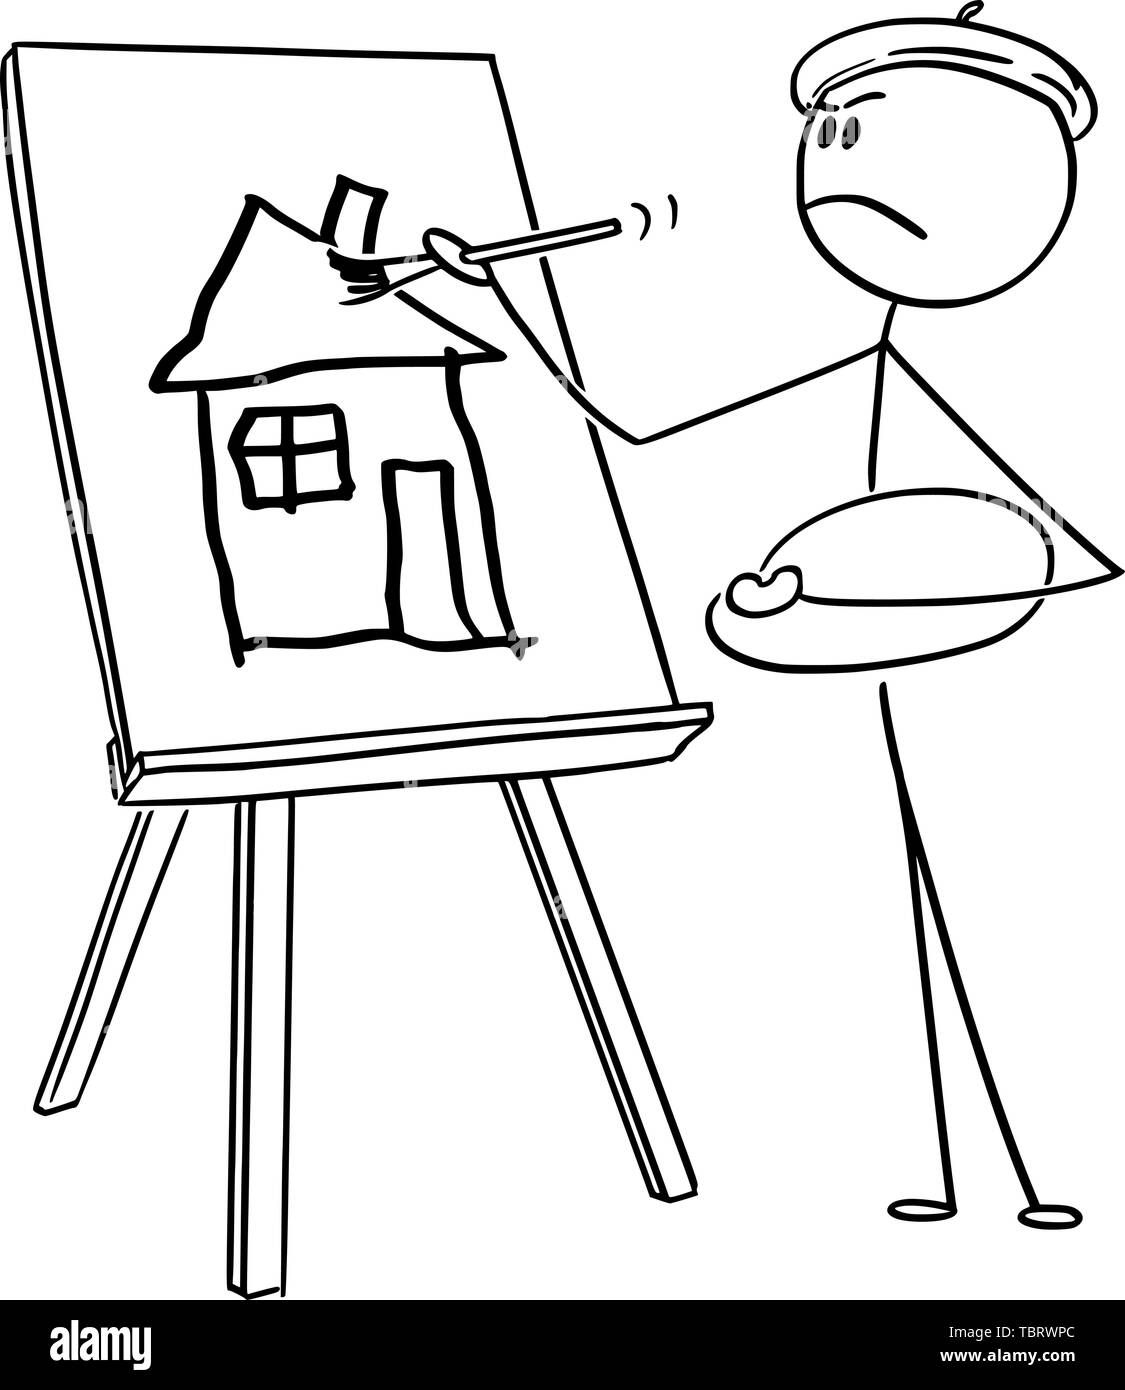 Vector cartoon stick figure drawing conceptual illustration of self-important man or artist with beret and palette painting amateurish house on canvas with brush. Stock Vector